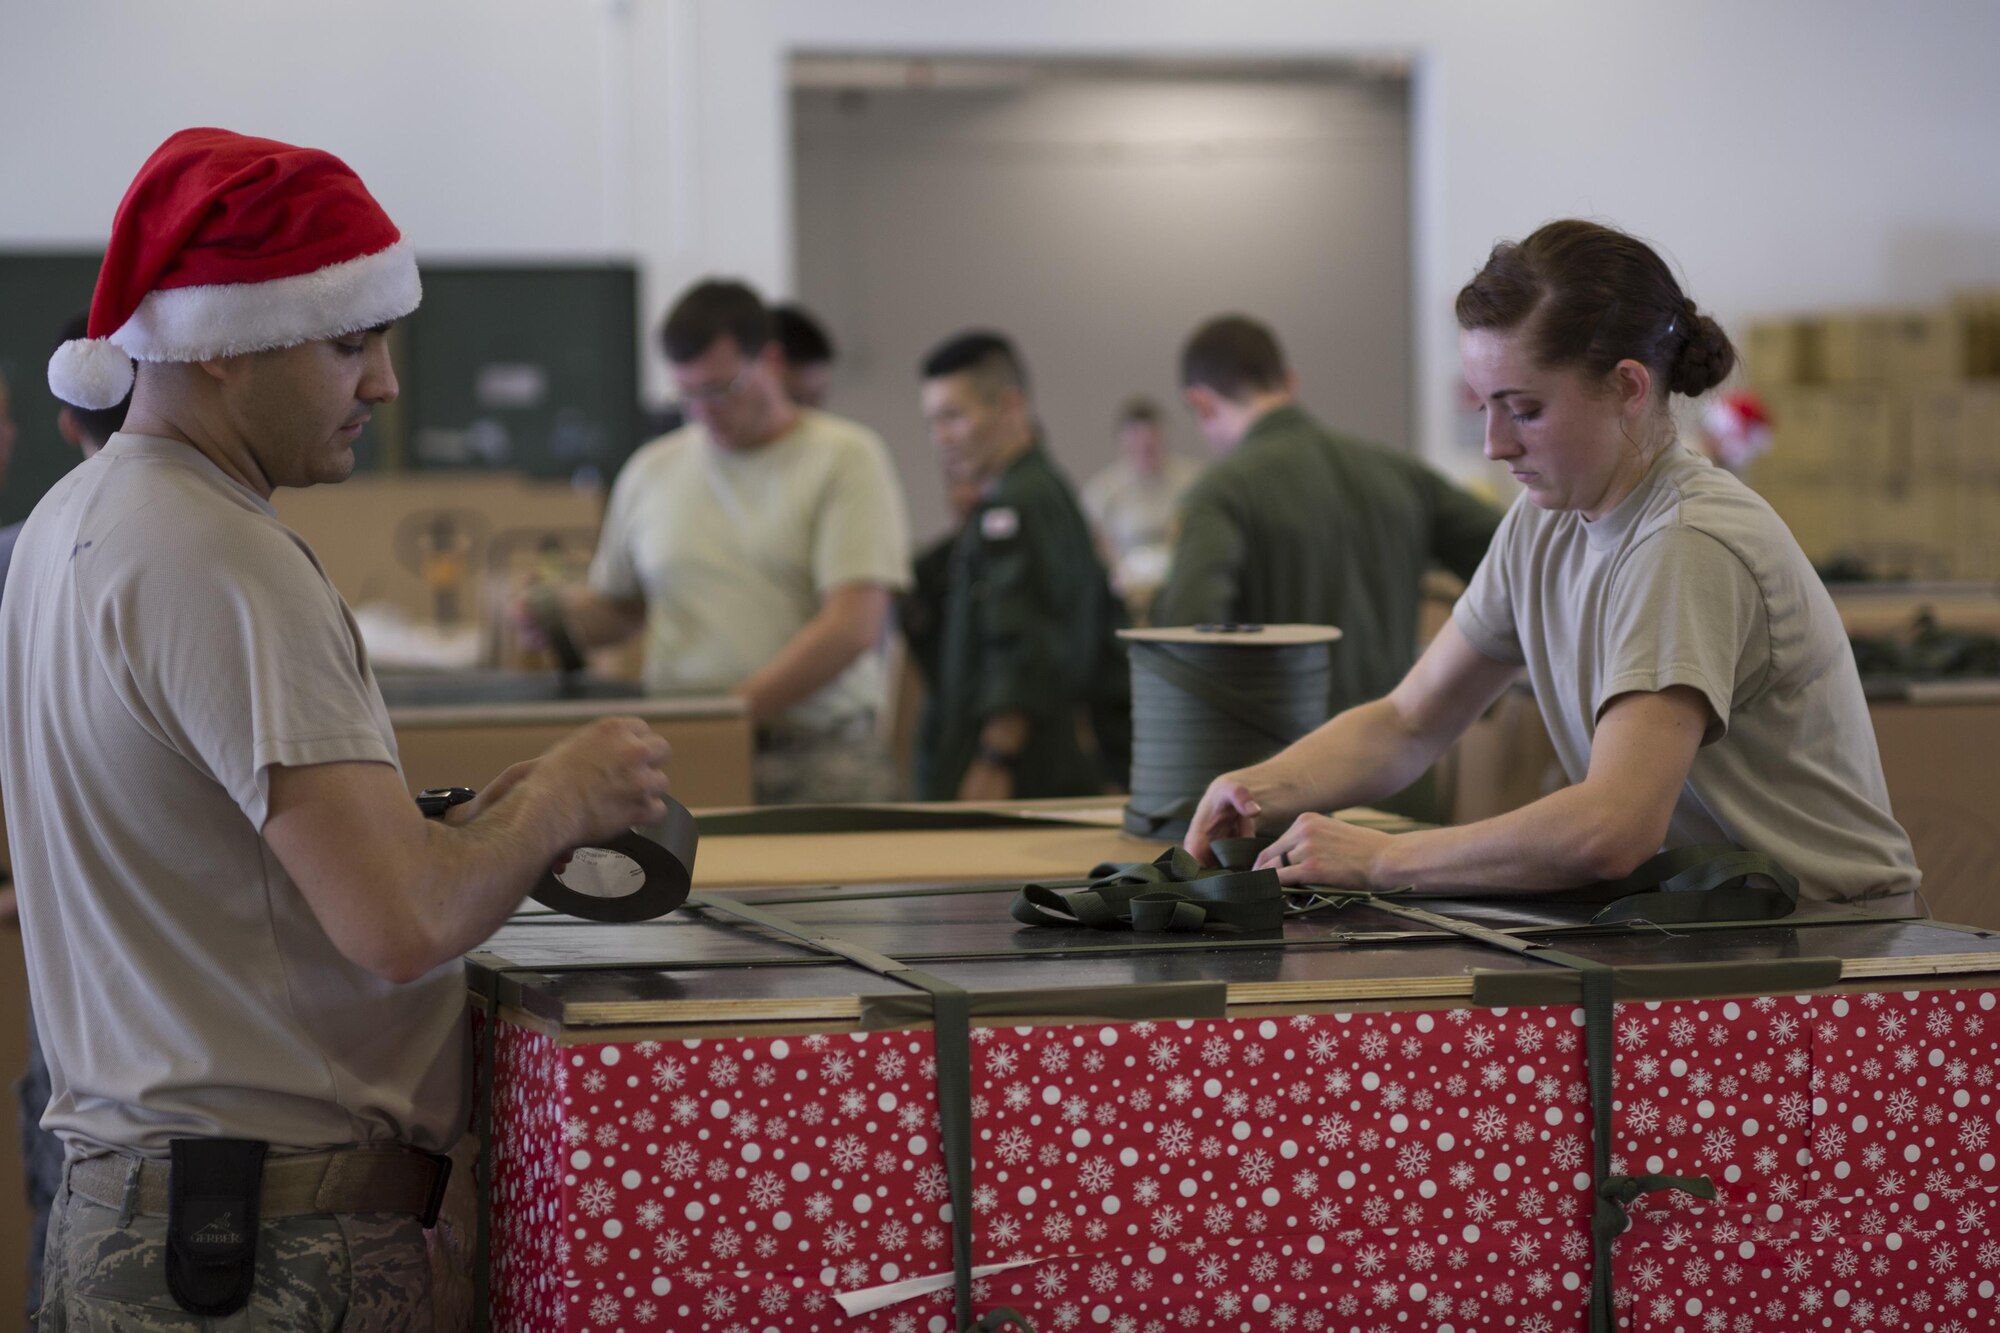 (Left to right) Staff Sgt. Joshua McDonald and Airman 1st Class Cassandra Cobb, 374th Logistics Readiness Squadron combat mobility flight, build a low-cost, low-altitude bundle destined for the island of Fais,  during Operation Christmas Drop at Andersen Air Force Base, Guam, Dec. 5, 2015. More than 40,000 pounds of donated goods, including relief supplies will be sent to 56 Micronesian islands during the operation, the longest running Department of Defense humanitarian airdrop mission. (U.S. Air Force photo by Osakabe Yasuo/Released)